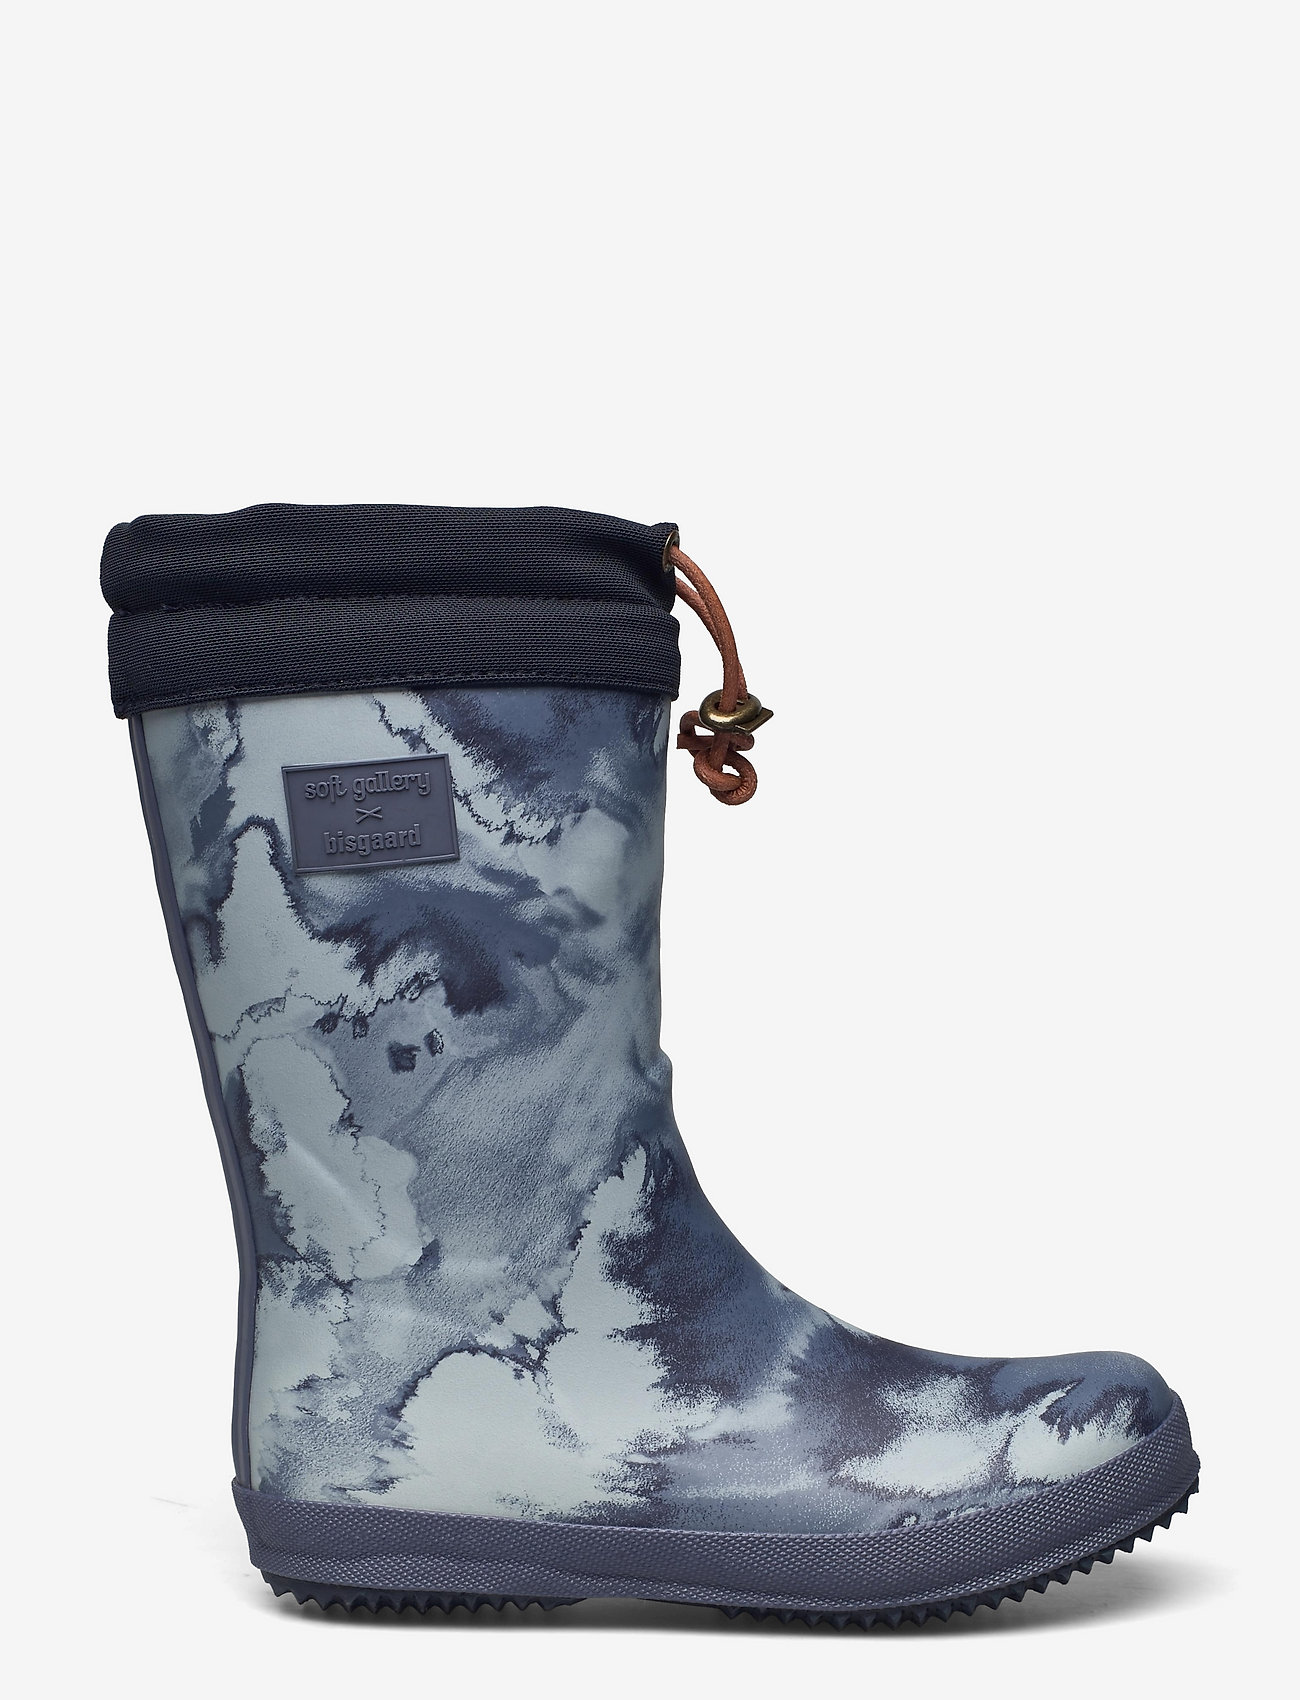 Bisgaard - Soft Gallery x bisgaard thermo - lined rubberboots - blue - 1